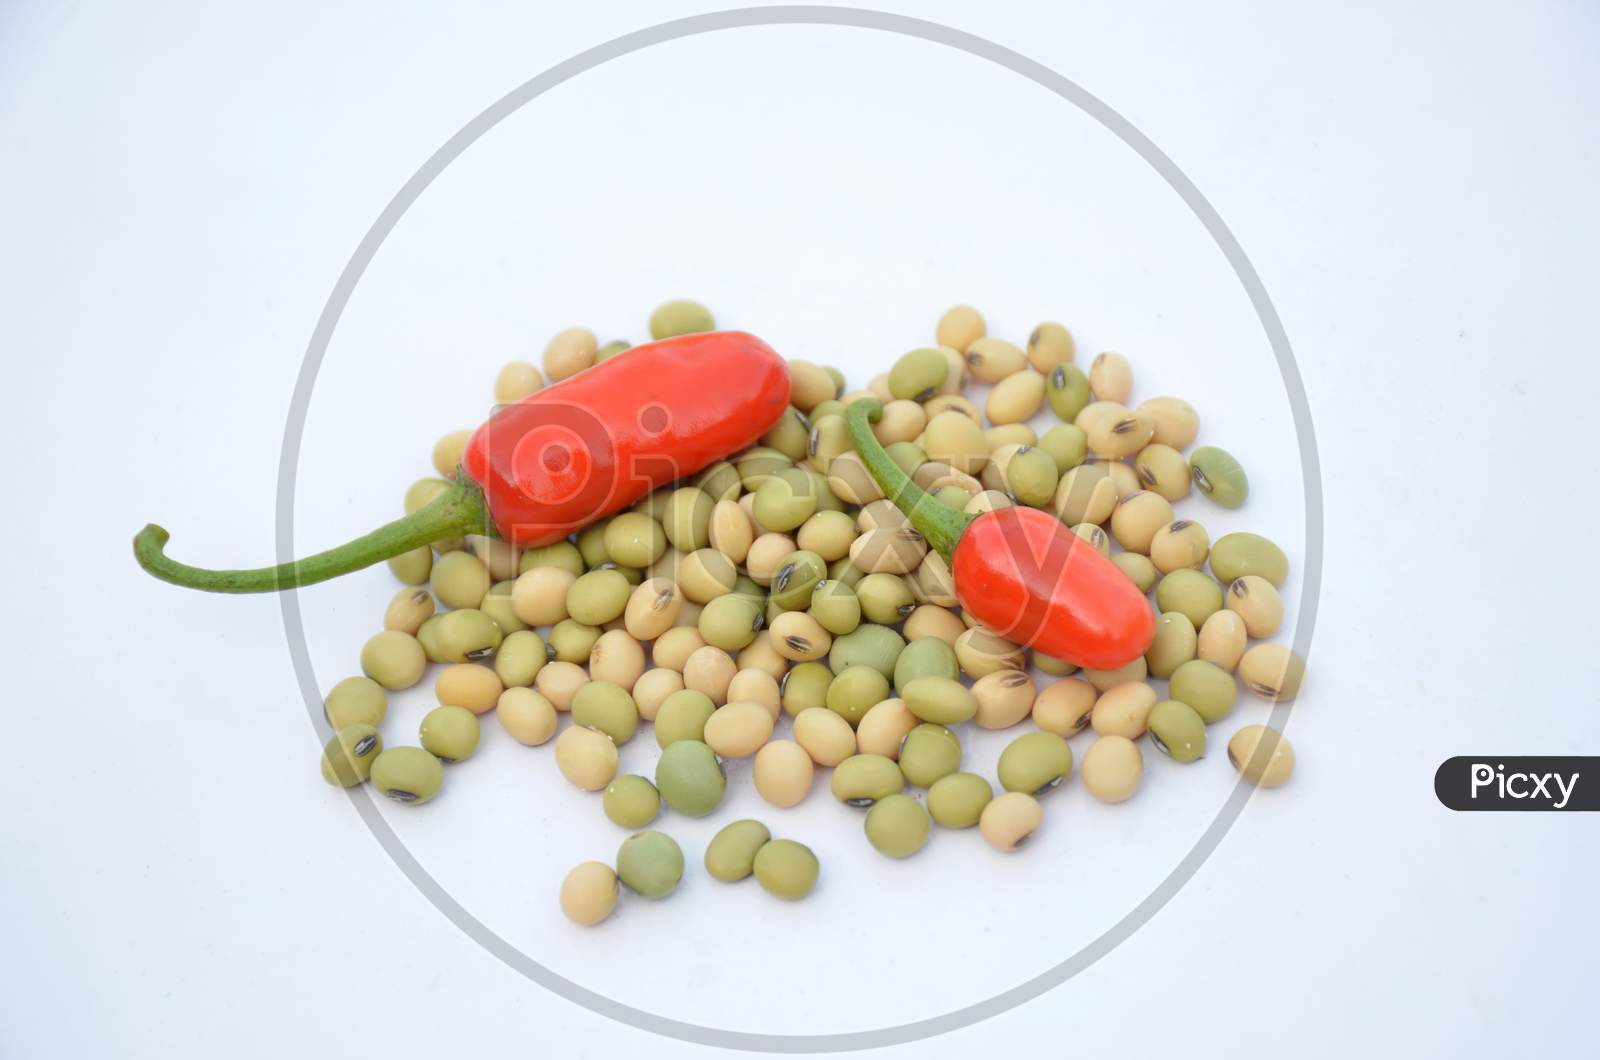 The Green Brown Soya Been Lentils With Red Chilly Isolated On White Background.